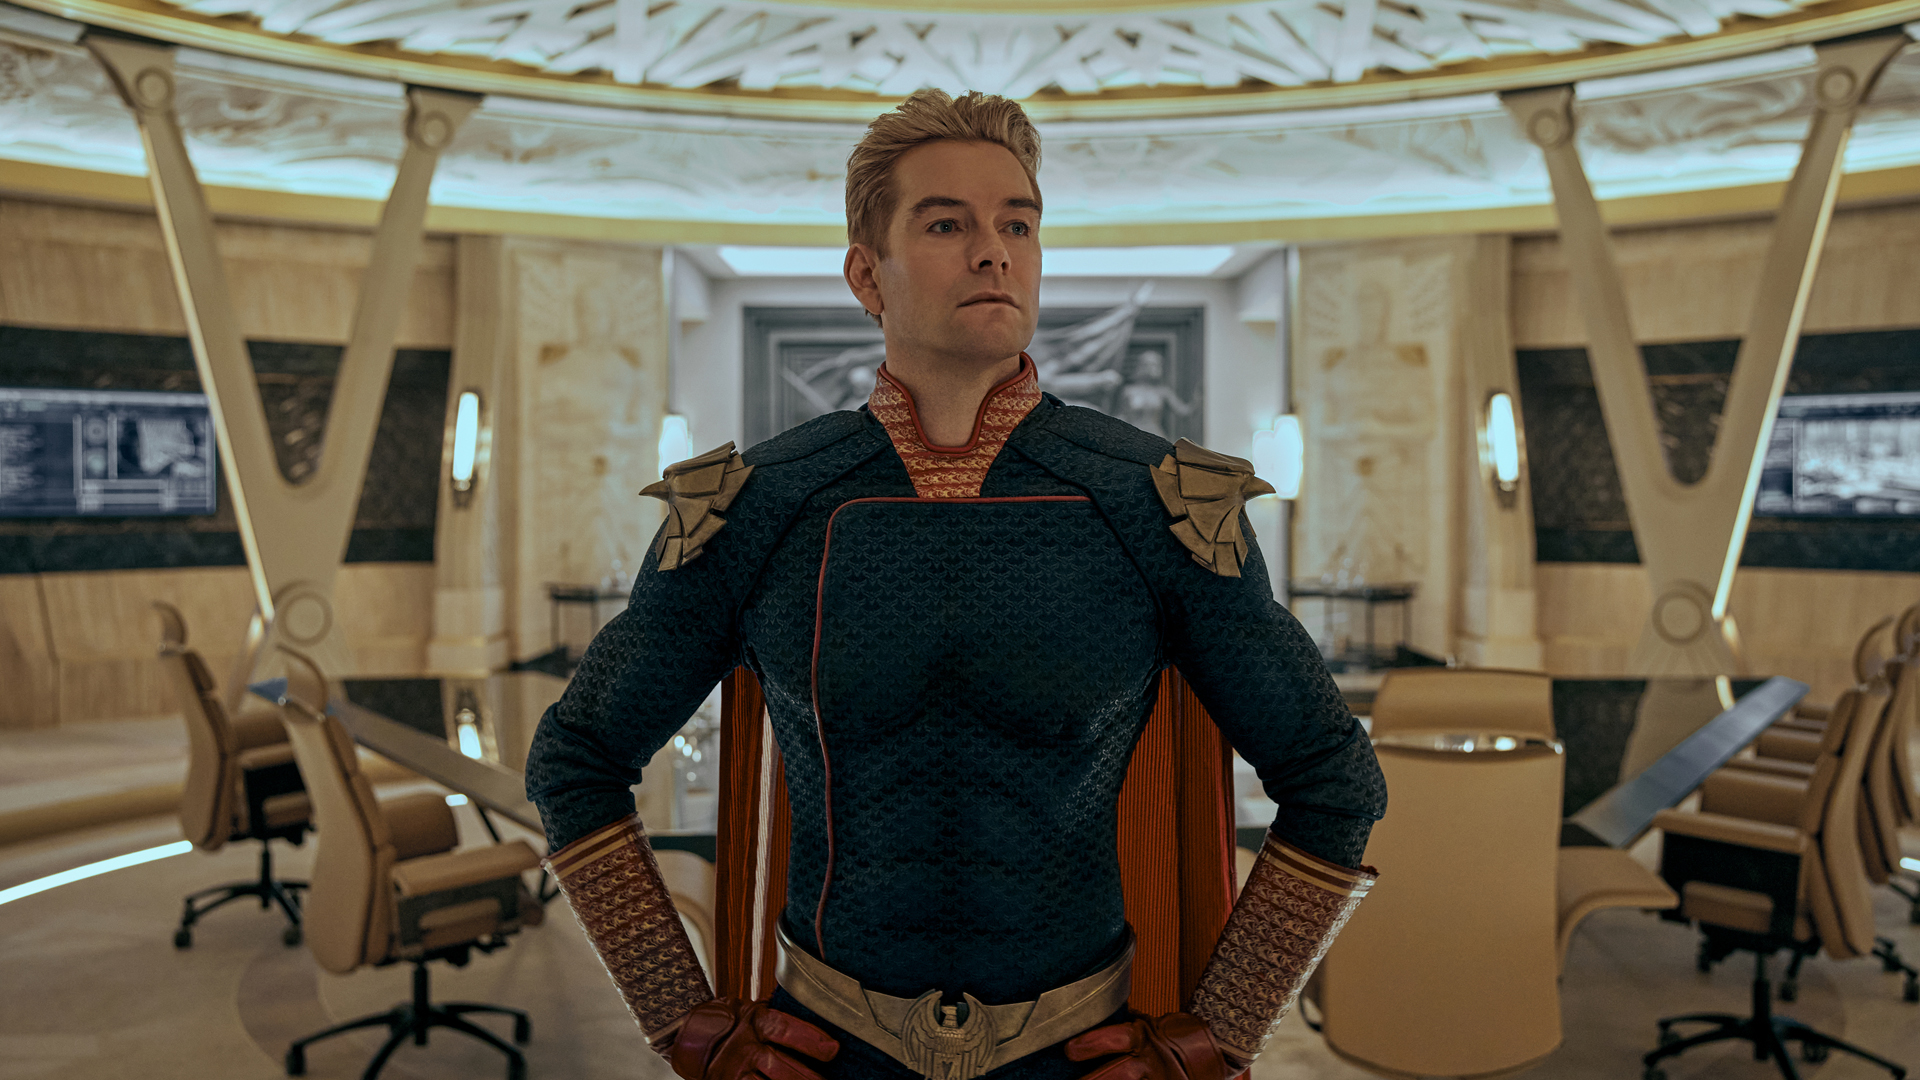 Homelander stands proud with his hands on his hips in Vought's main conference room in The Boys season 3